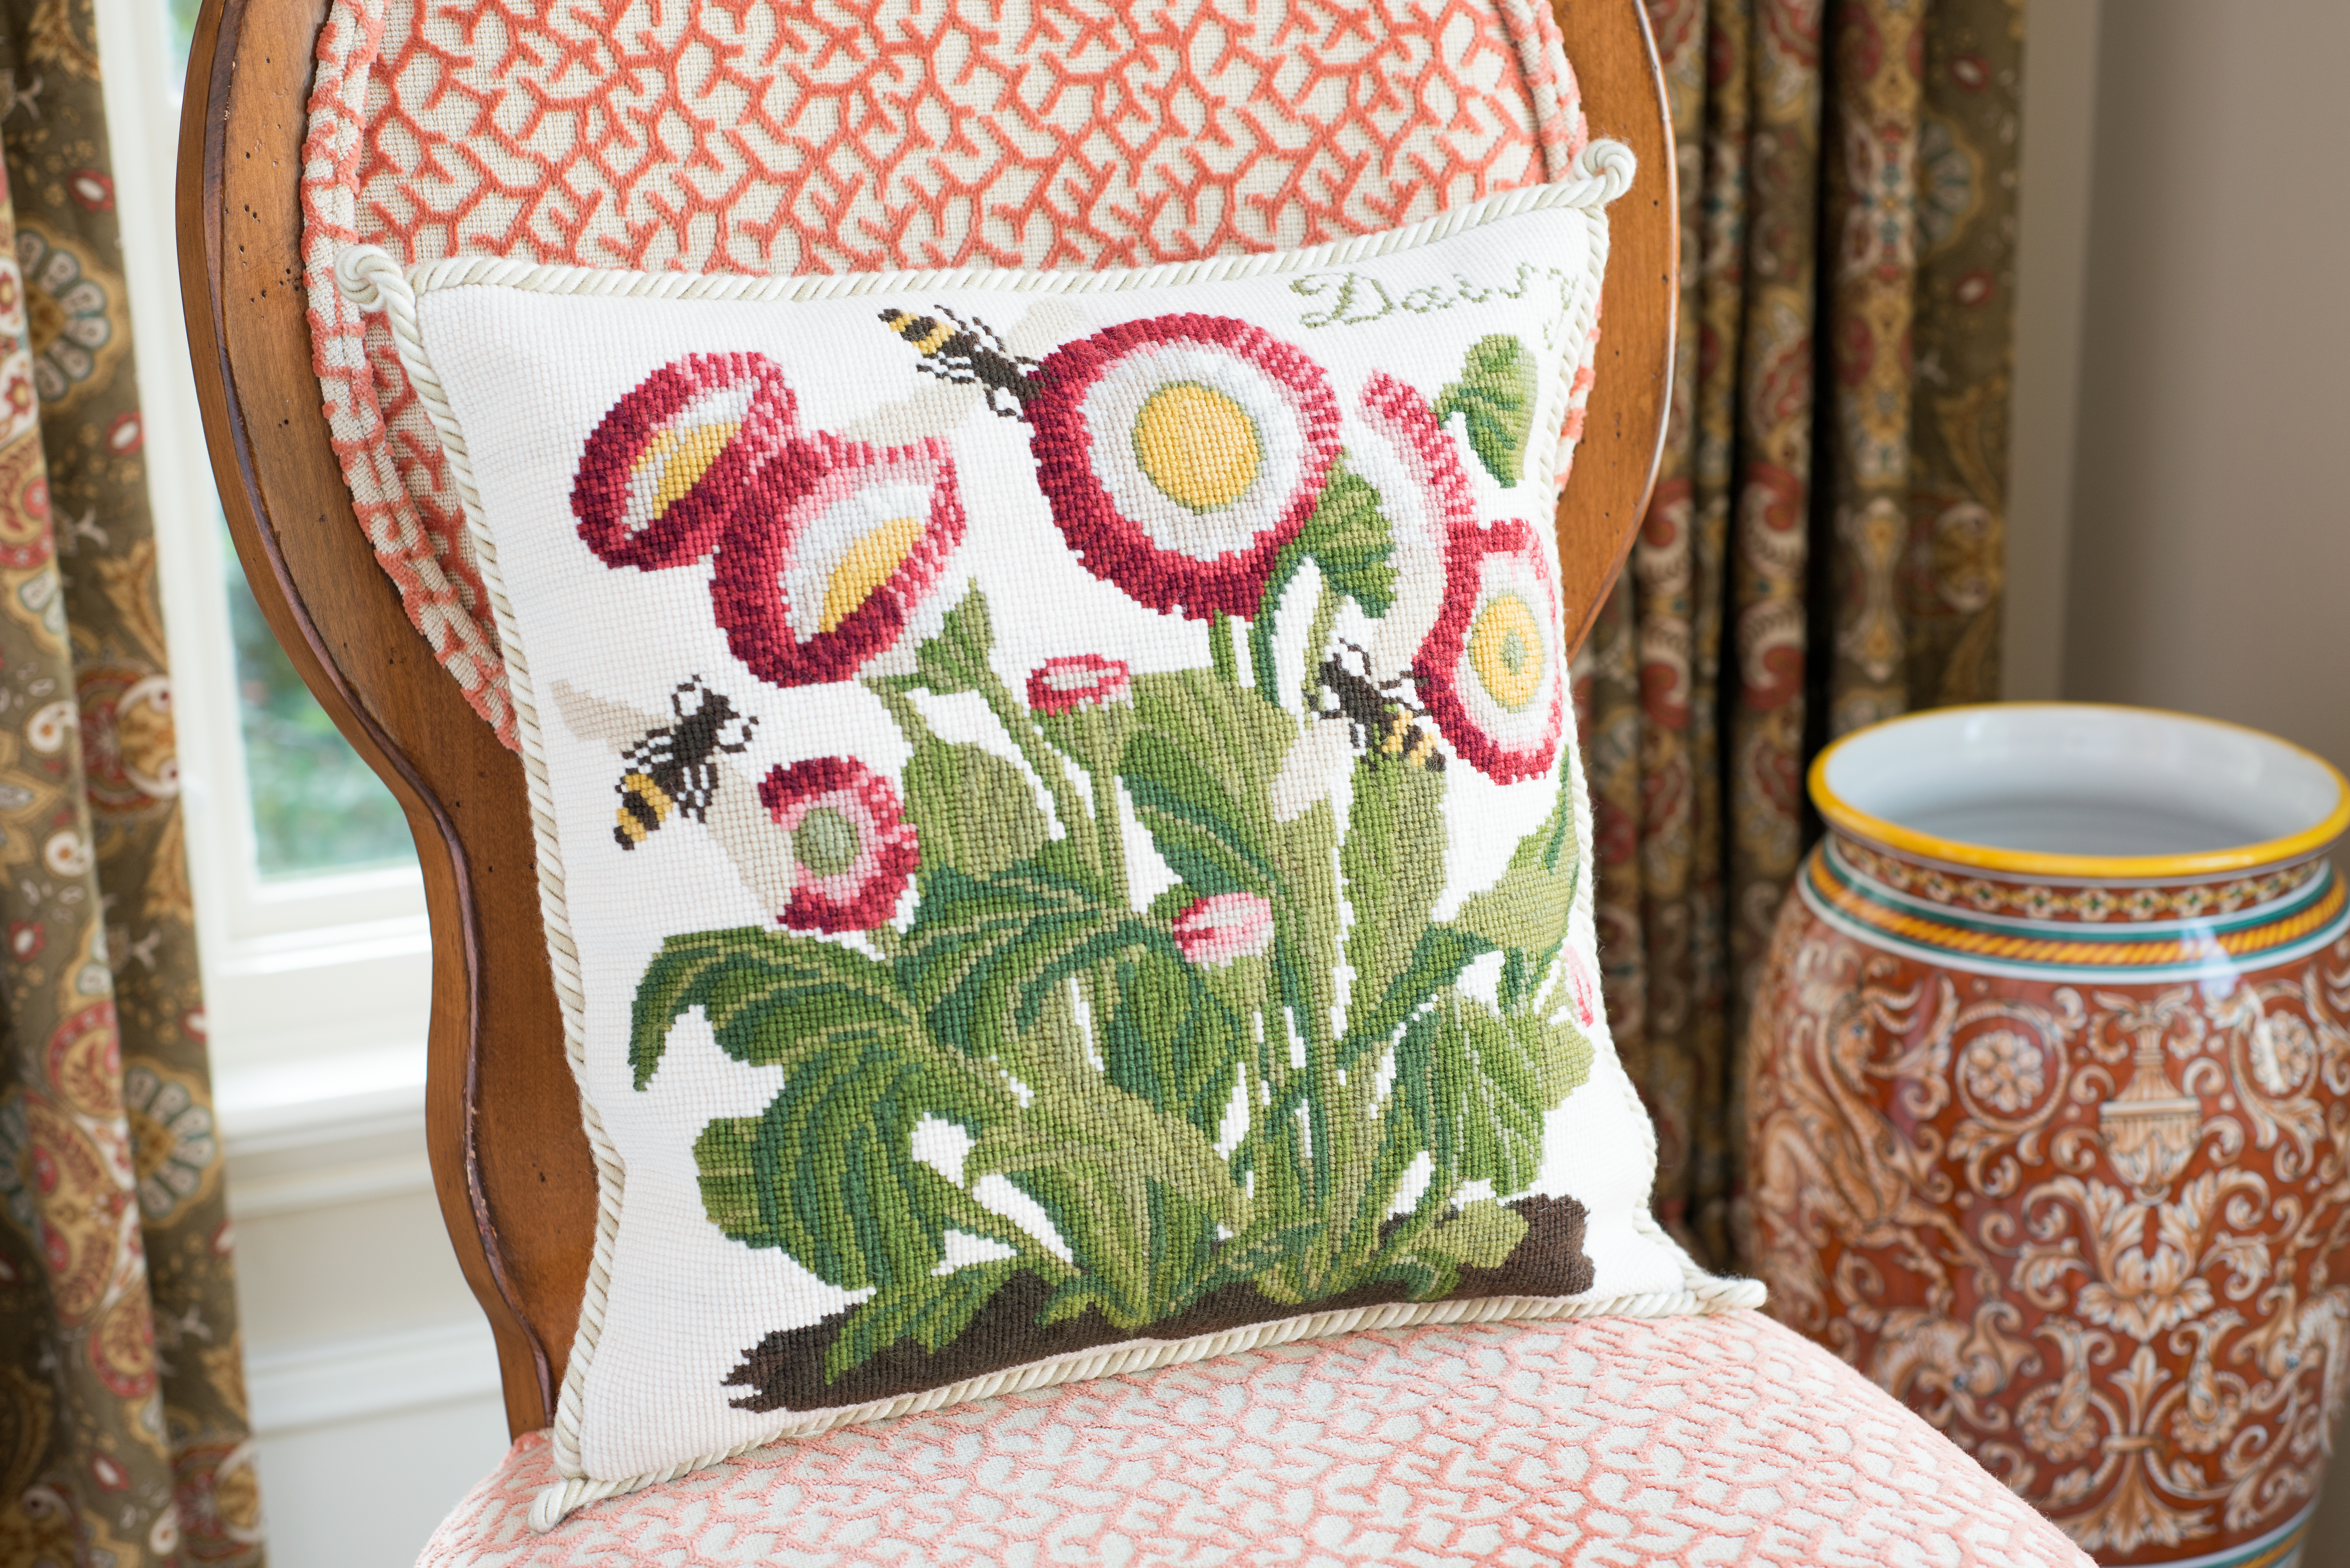 Daisy on Cream Needlepoint Pillow by Elizabeth Bradely Home